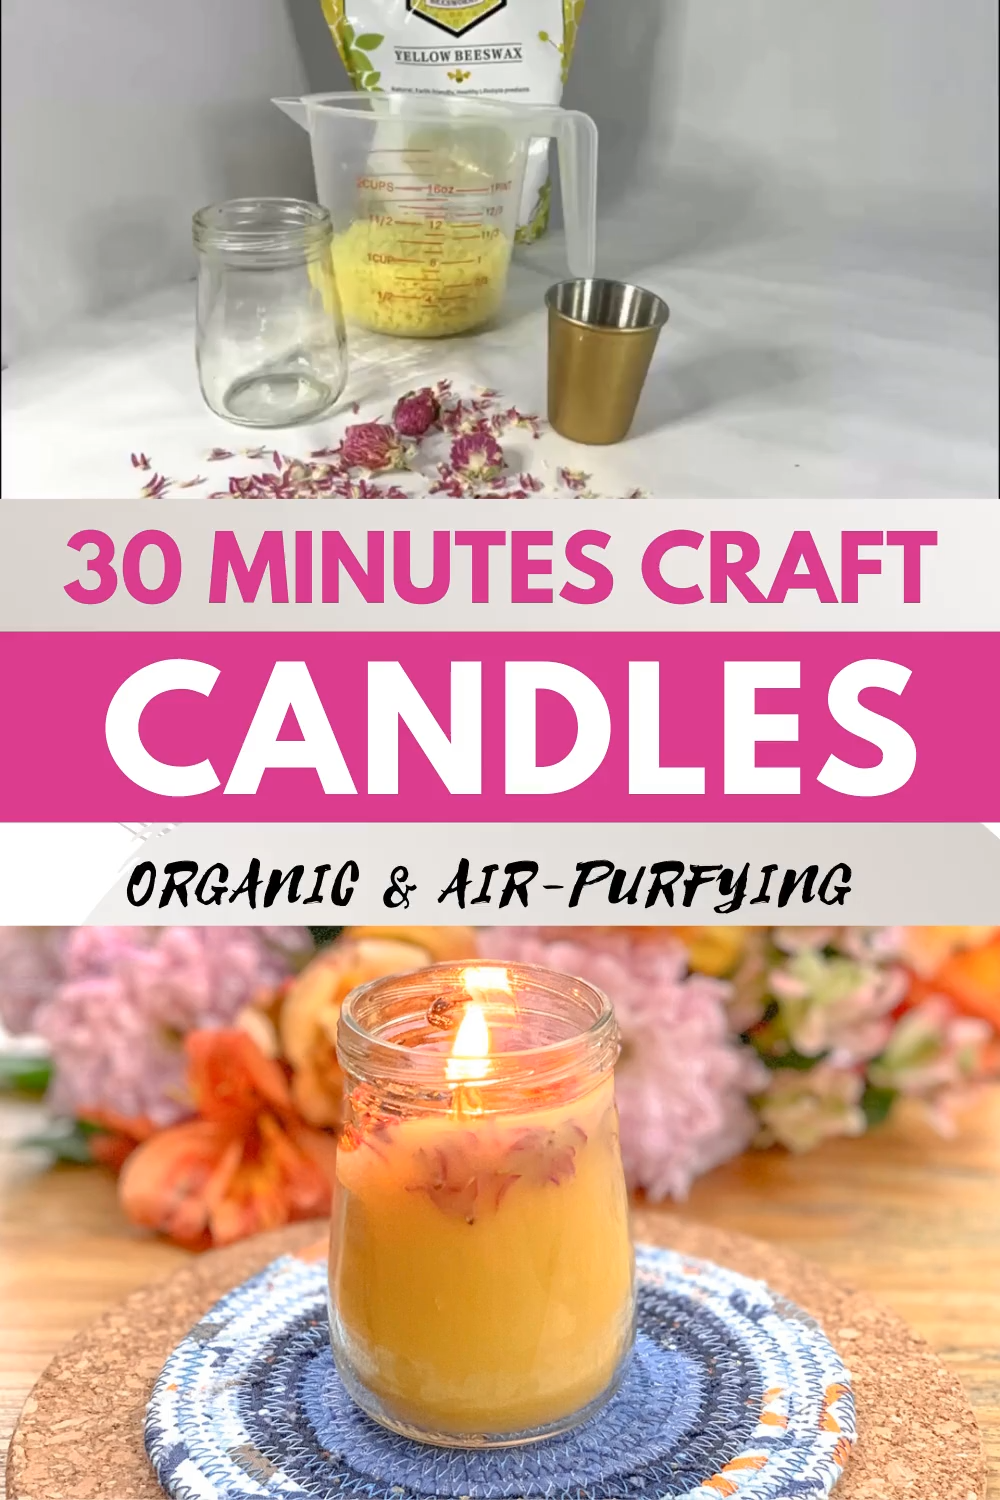 Do you want to make a natural beeswax candle? - Learn to create beautiful things -   18 diy Candles gifts ideas